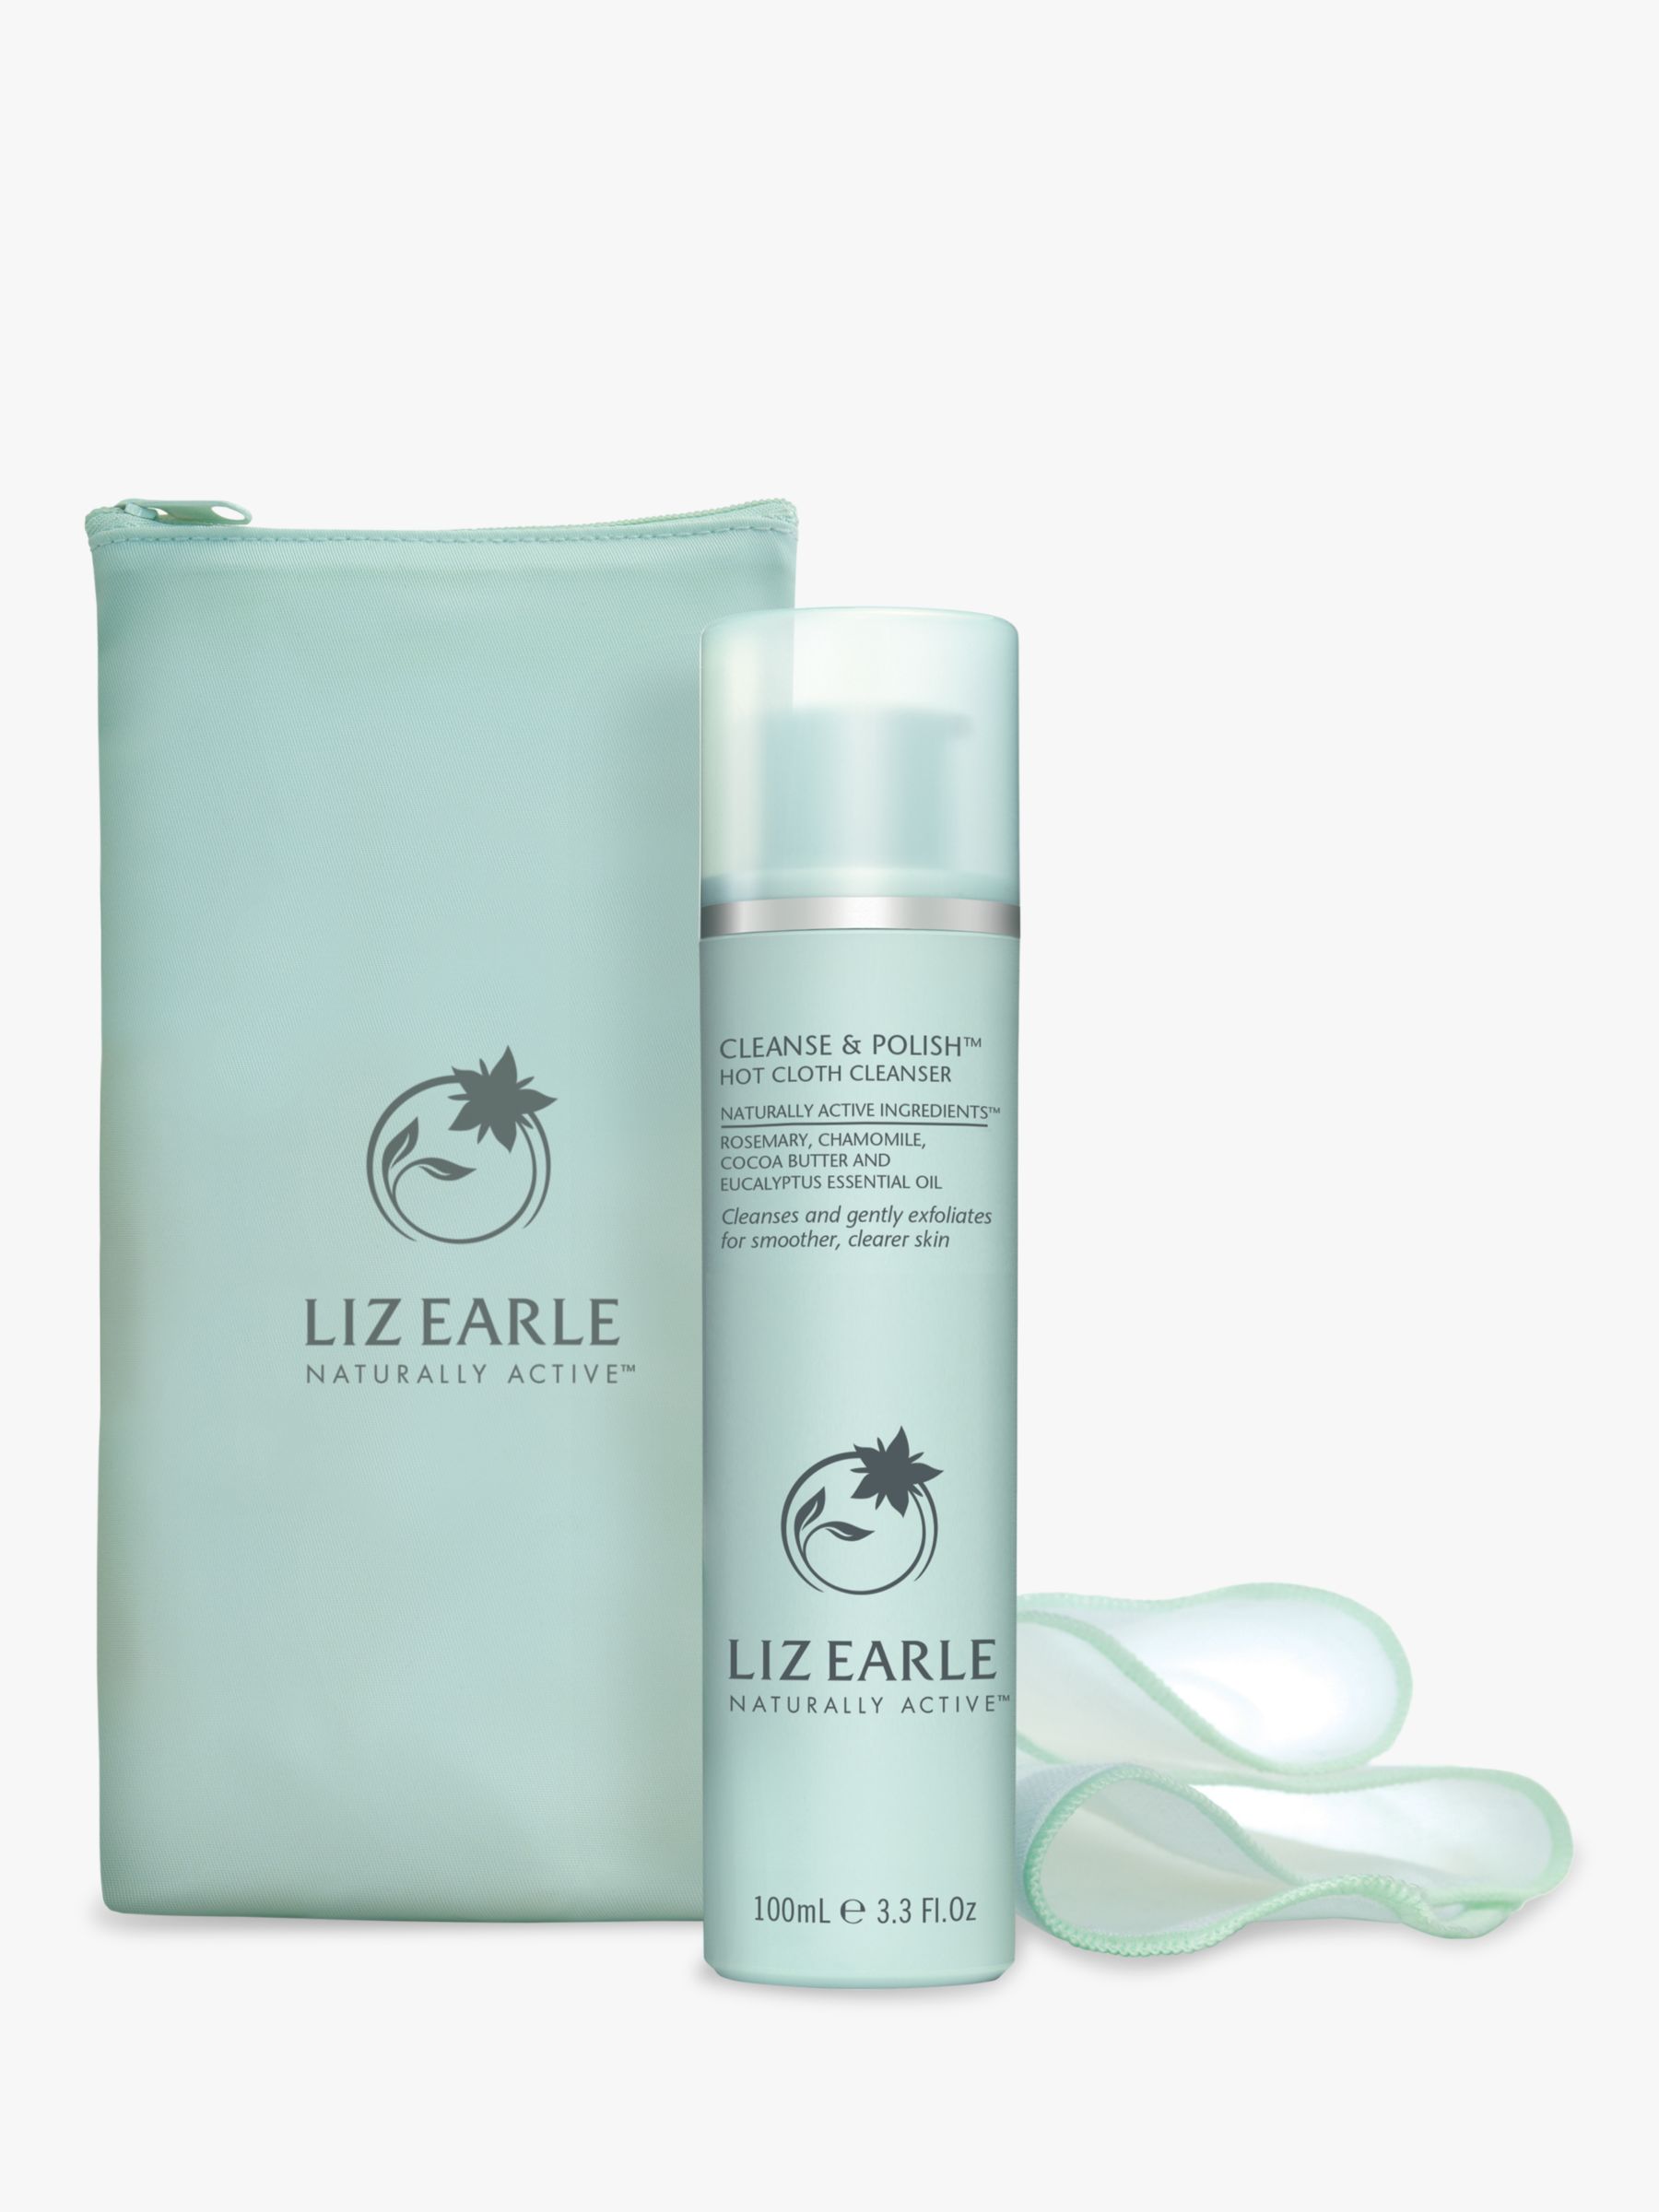 Liz Earle Cleanse And Polish™ Hot Cloth Cleanser 100ml With 2 Muslin Cloths At John Lewis